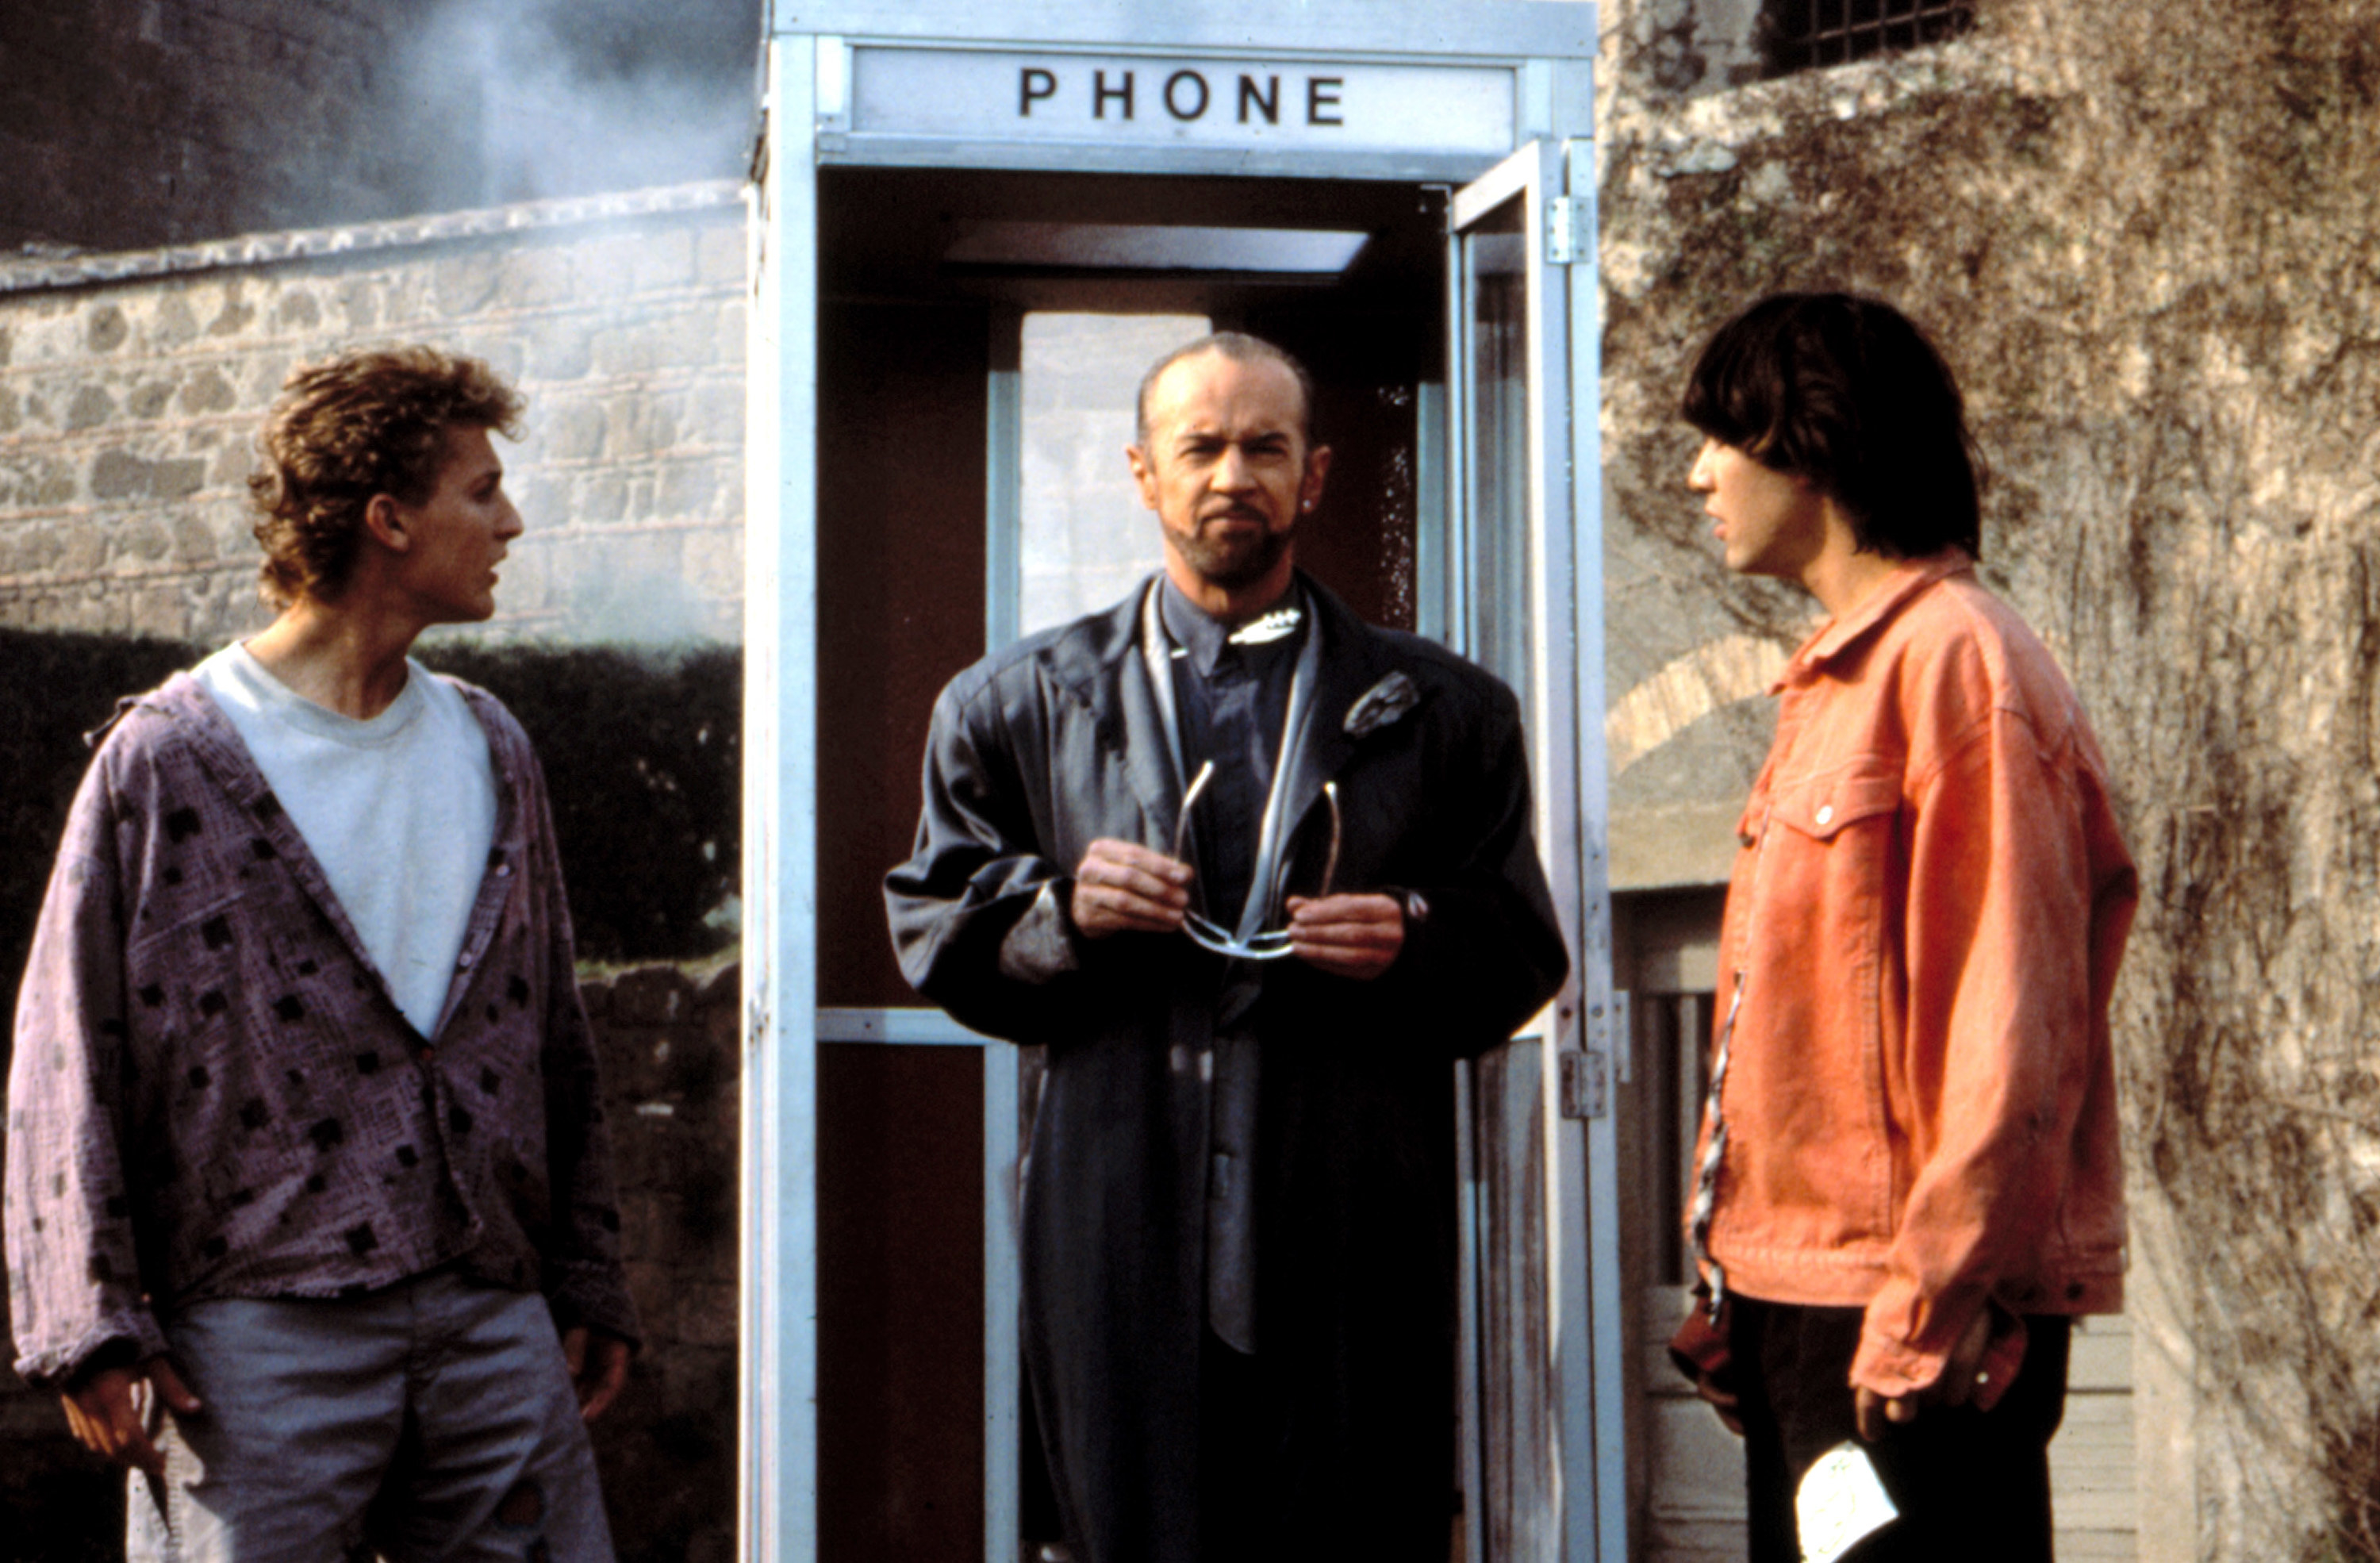 Keanu looks at George who is standing in a phone booth in the movie